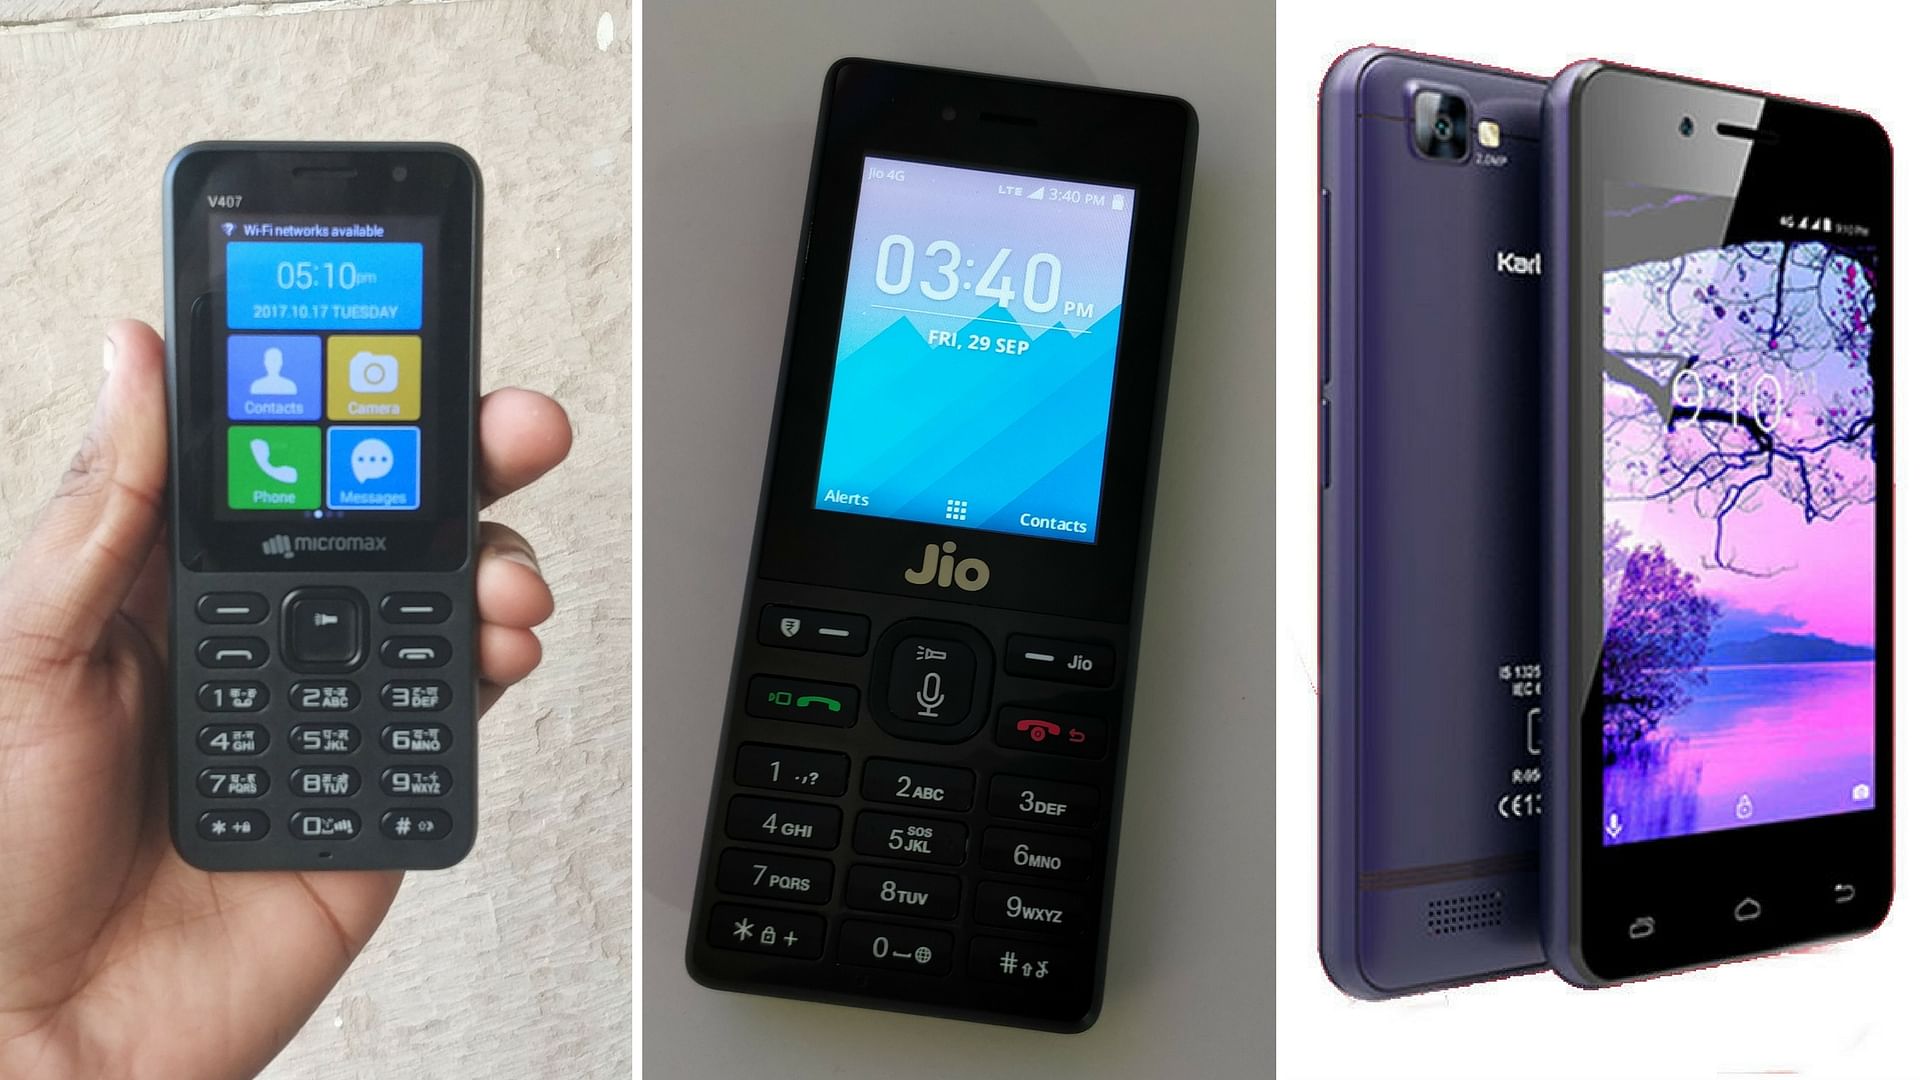 Reliance JioPhone has competition now. <i>(Photo: <b>The Quint</b>)</i>